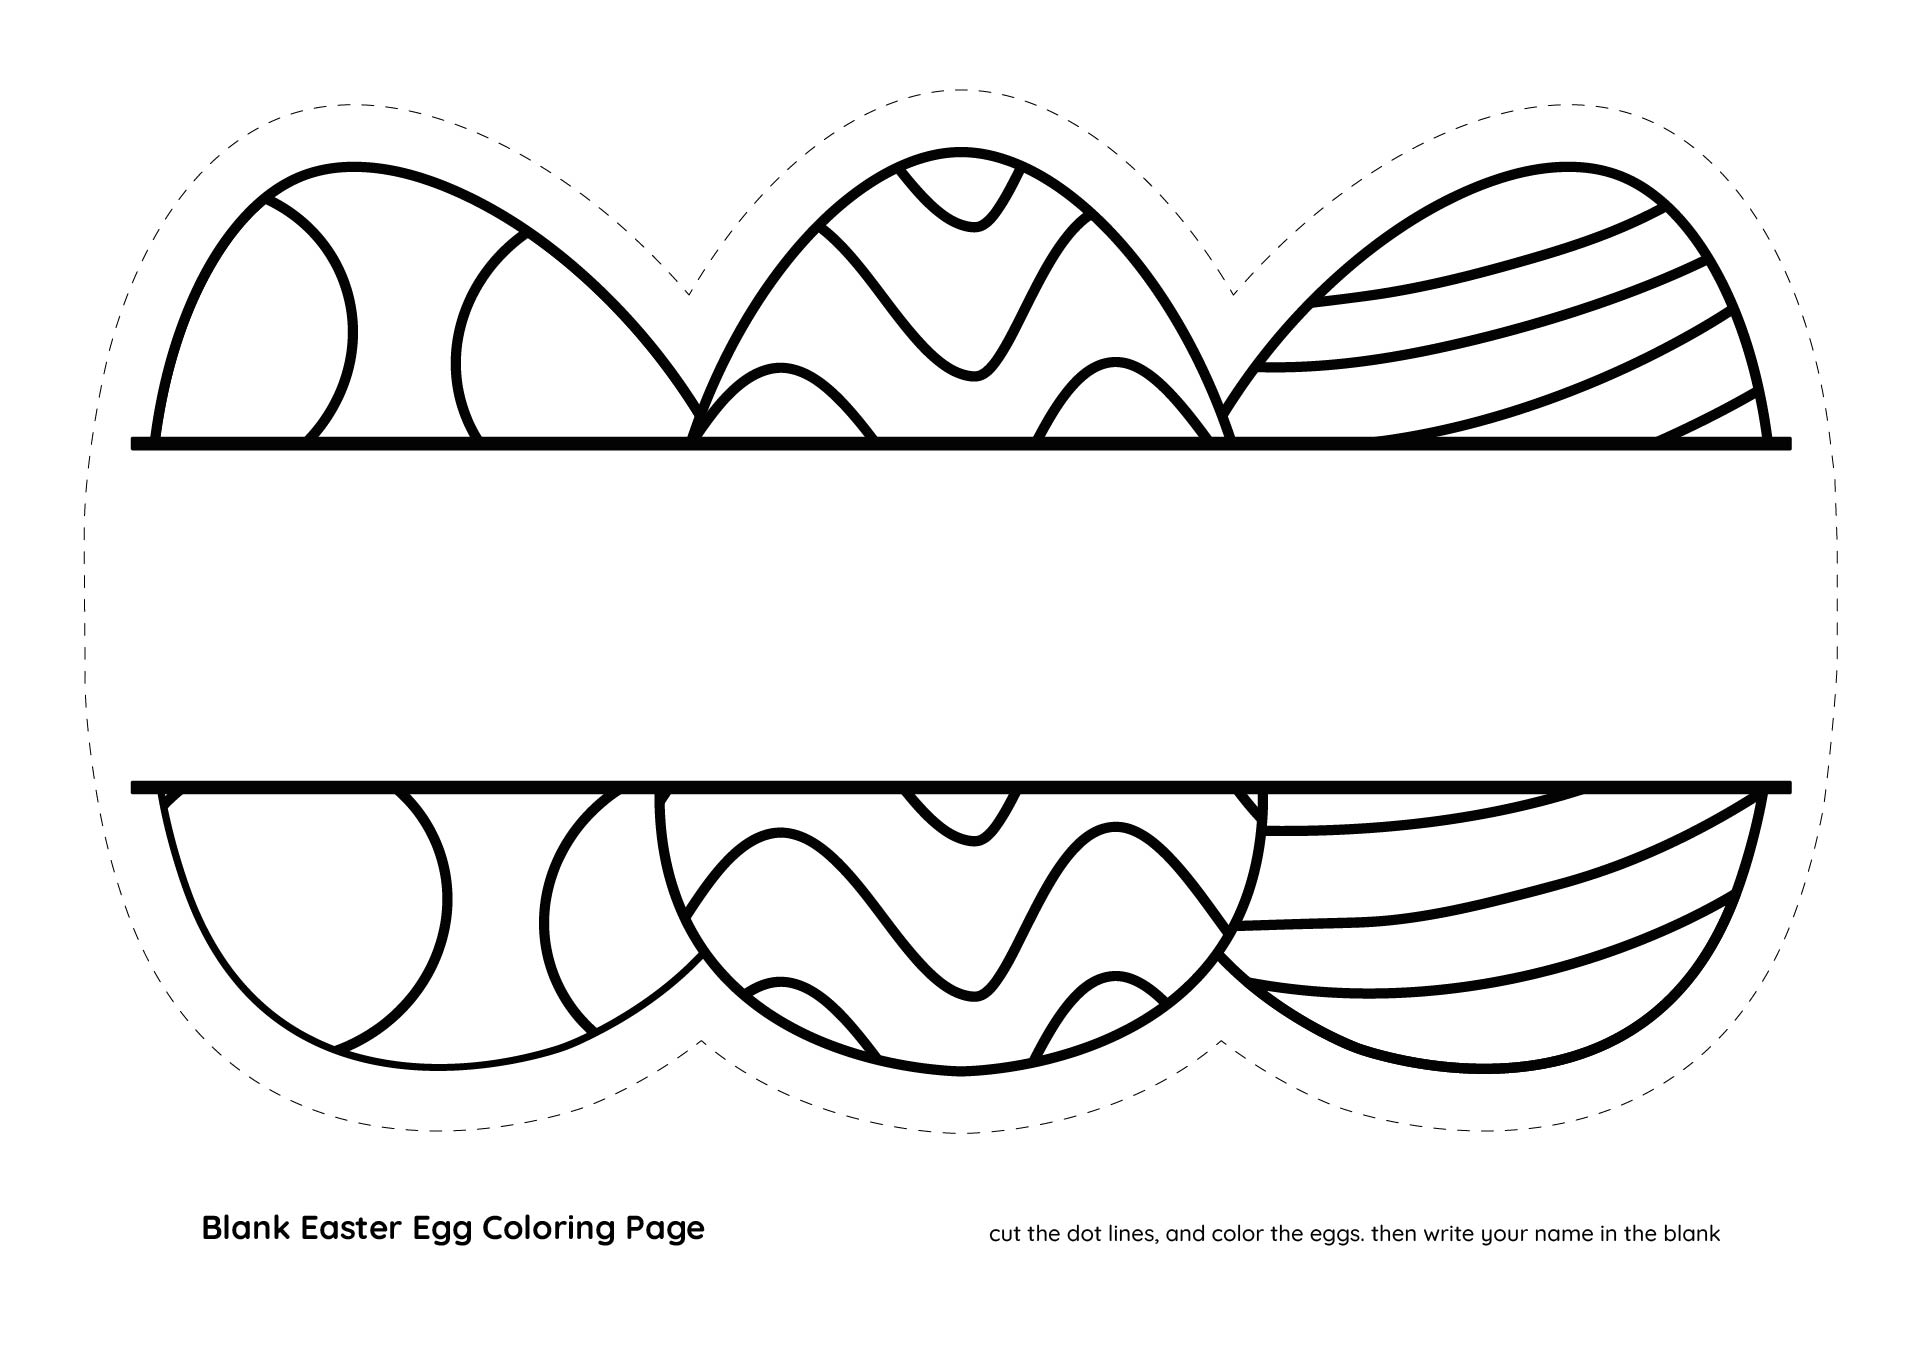 Printable Blank Easter Egg Coloring Page